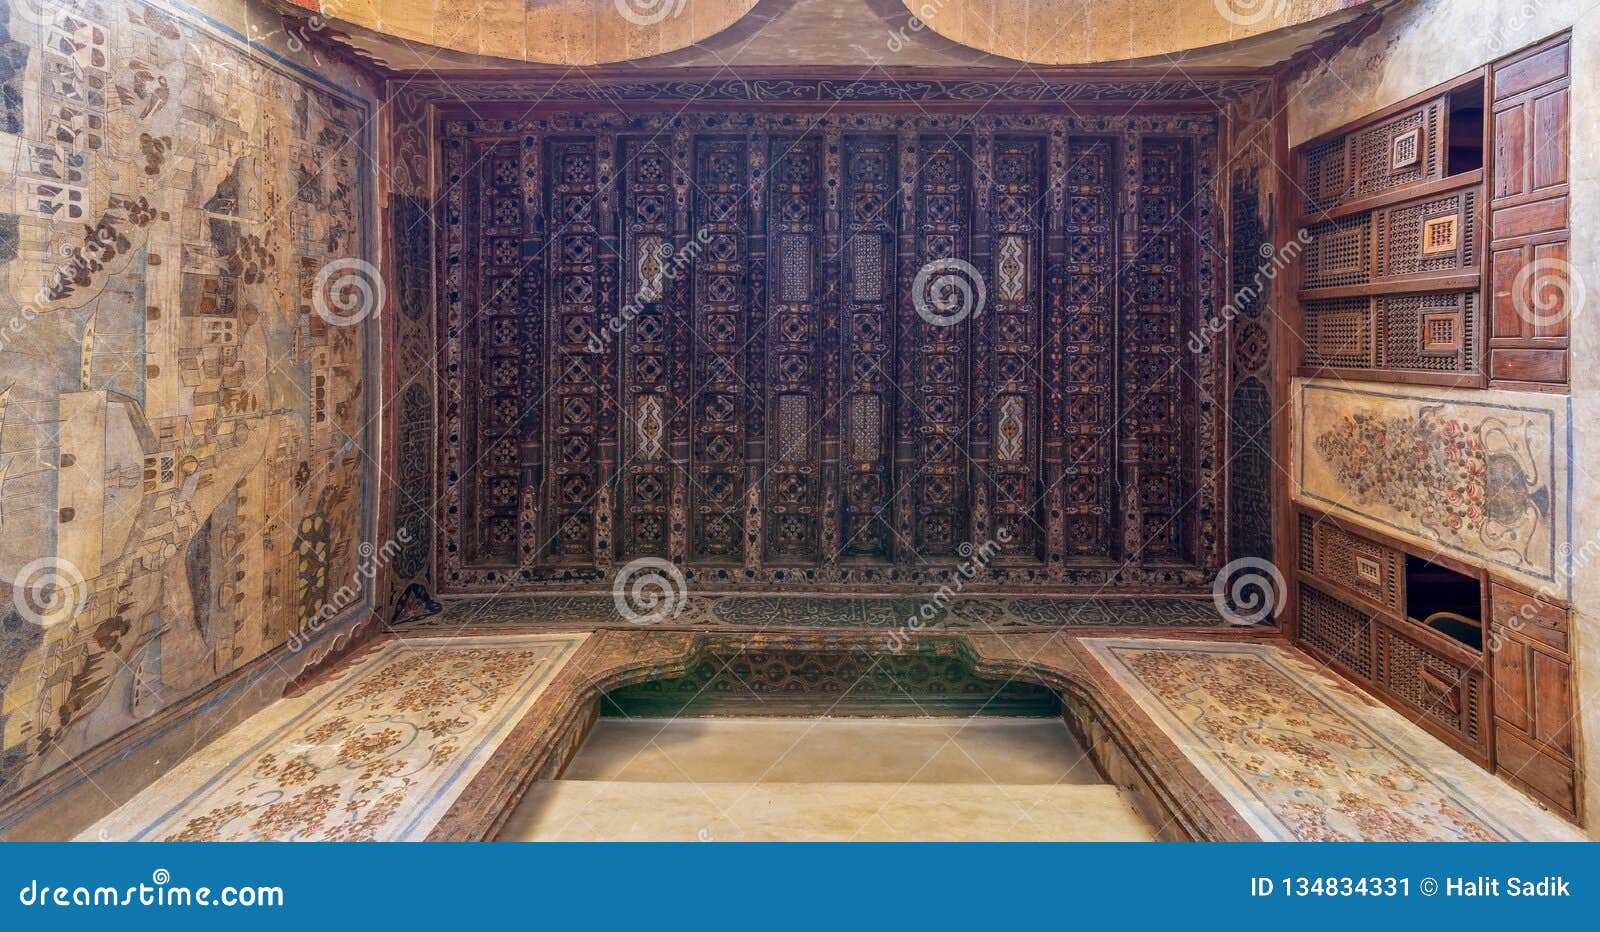 wooden ceiling decorated with floral pattern decorations and mural at historic beit el set waseela building, old cairo, egypt